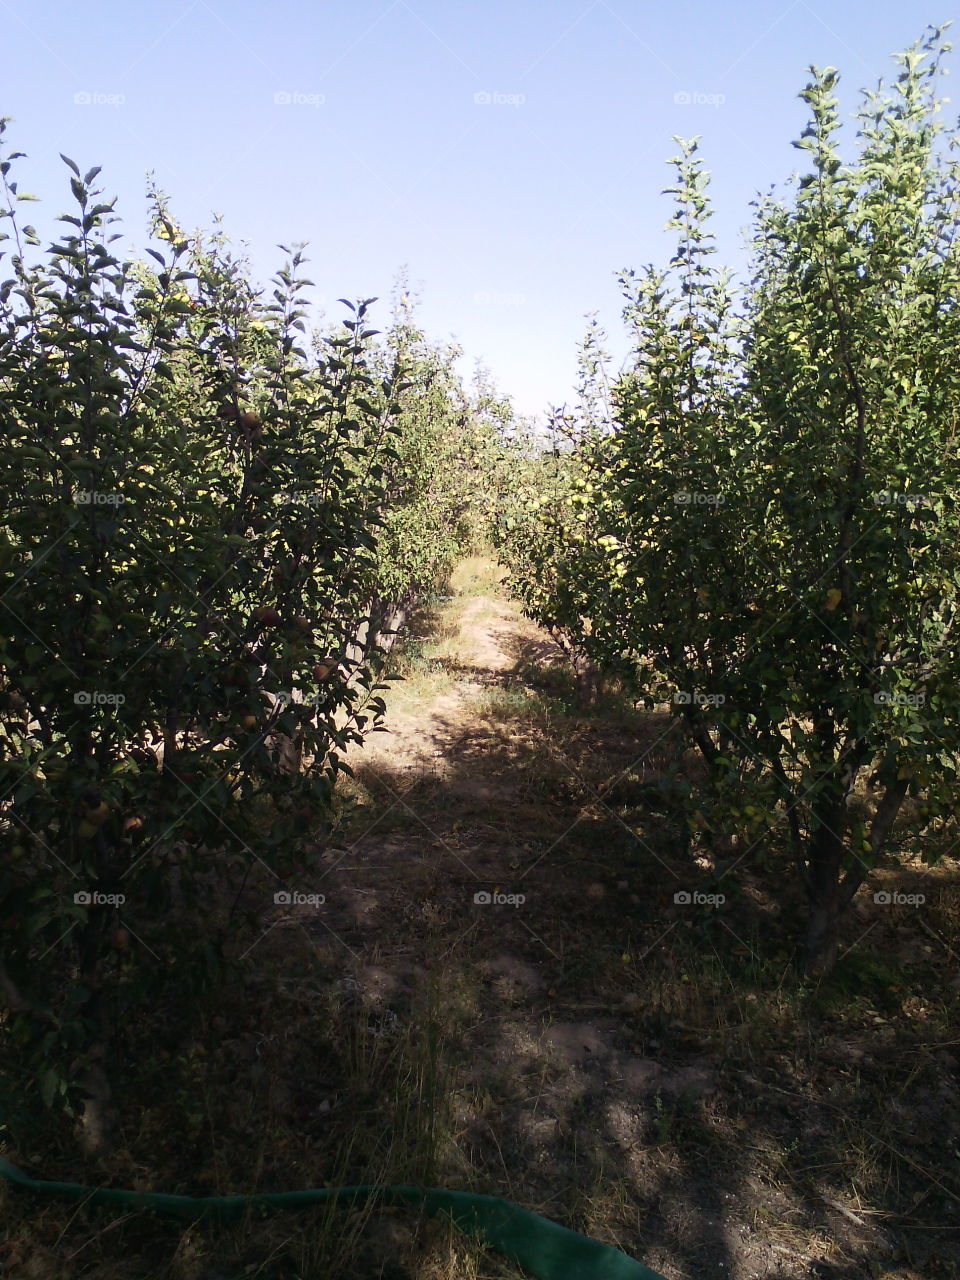 Green apple trees ready to harvest.